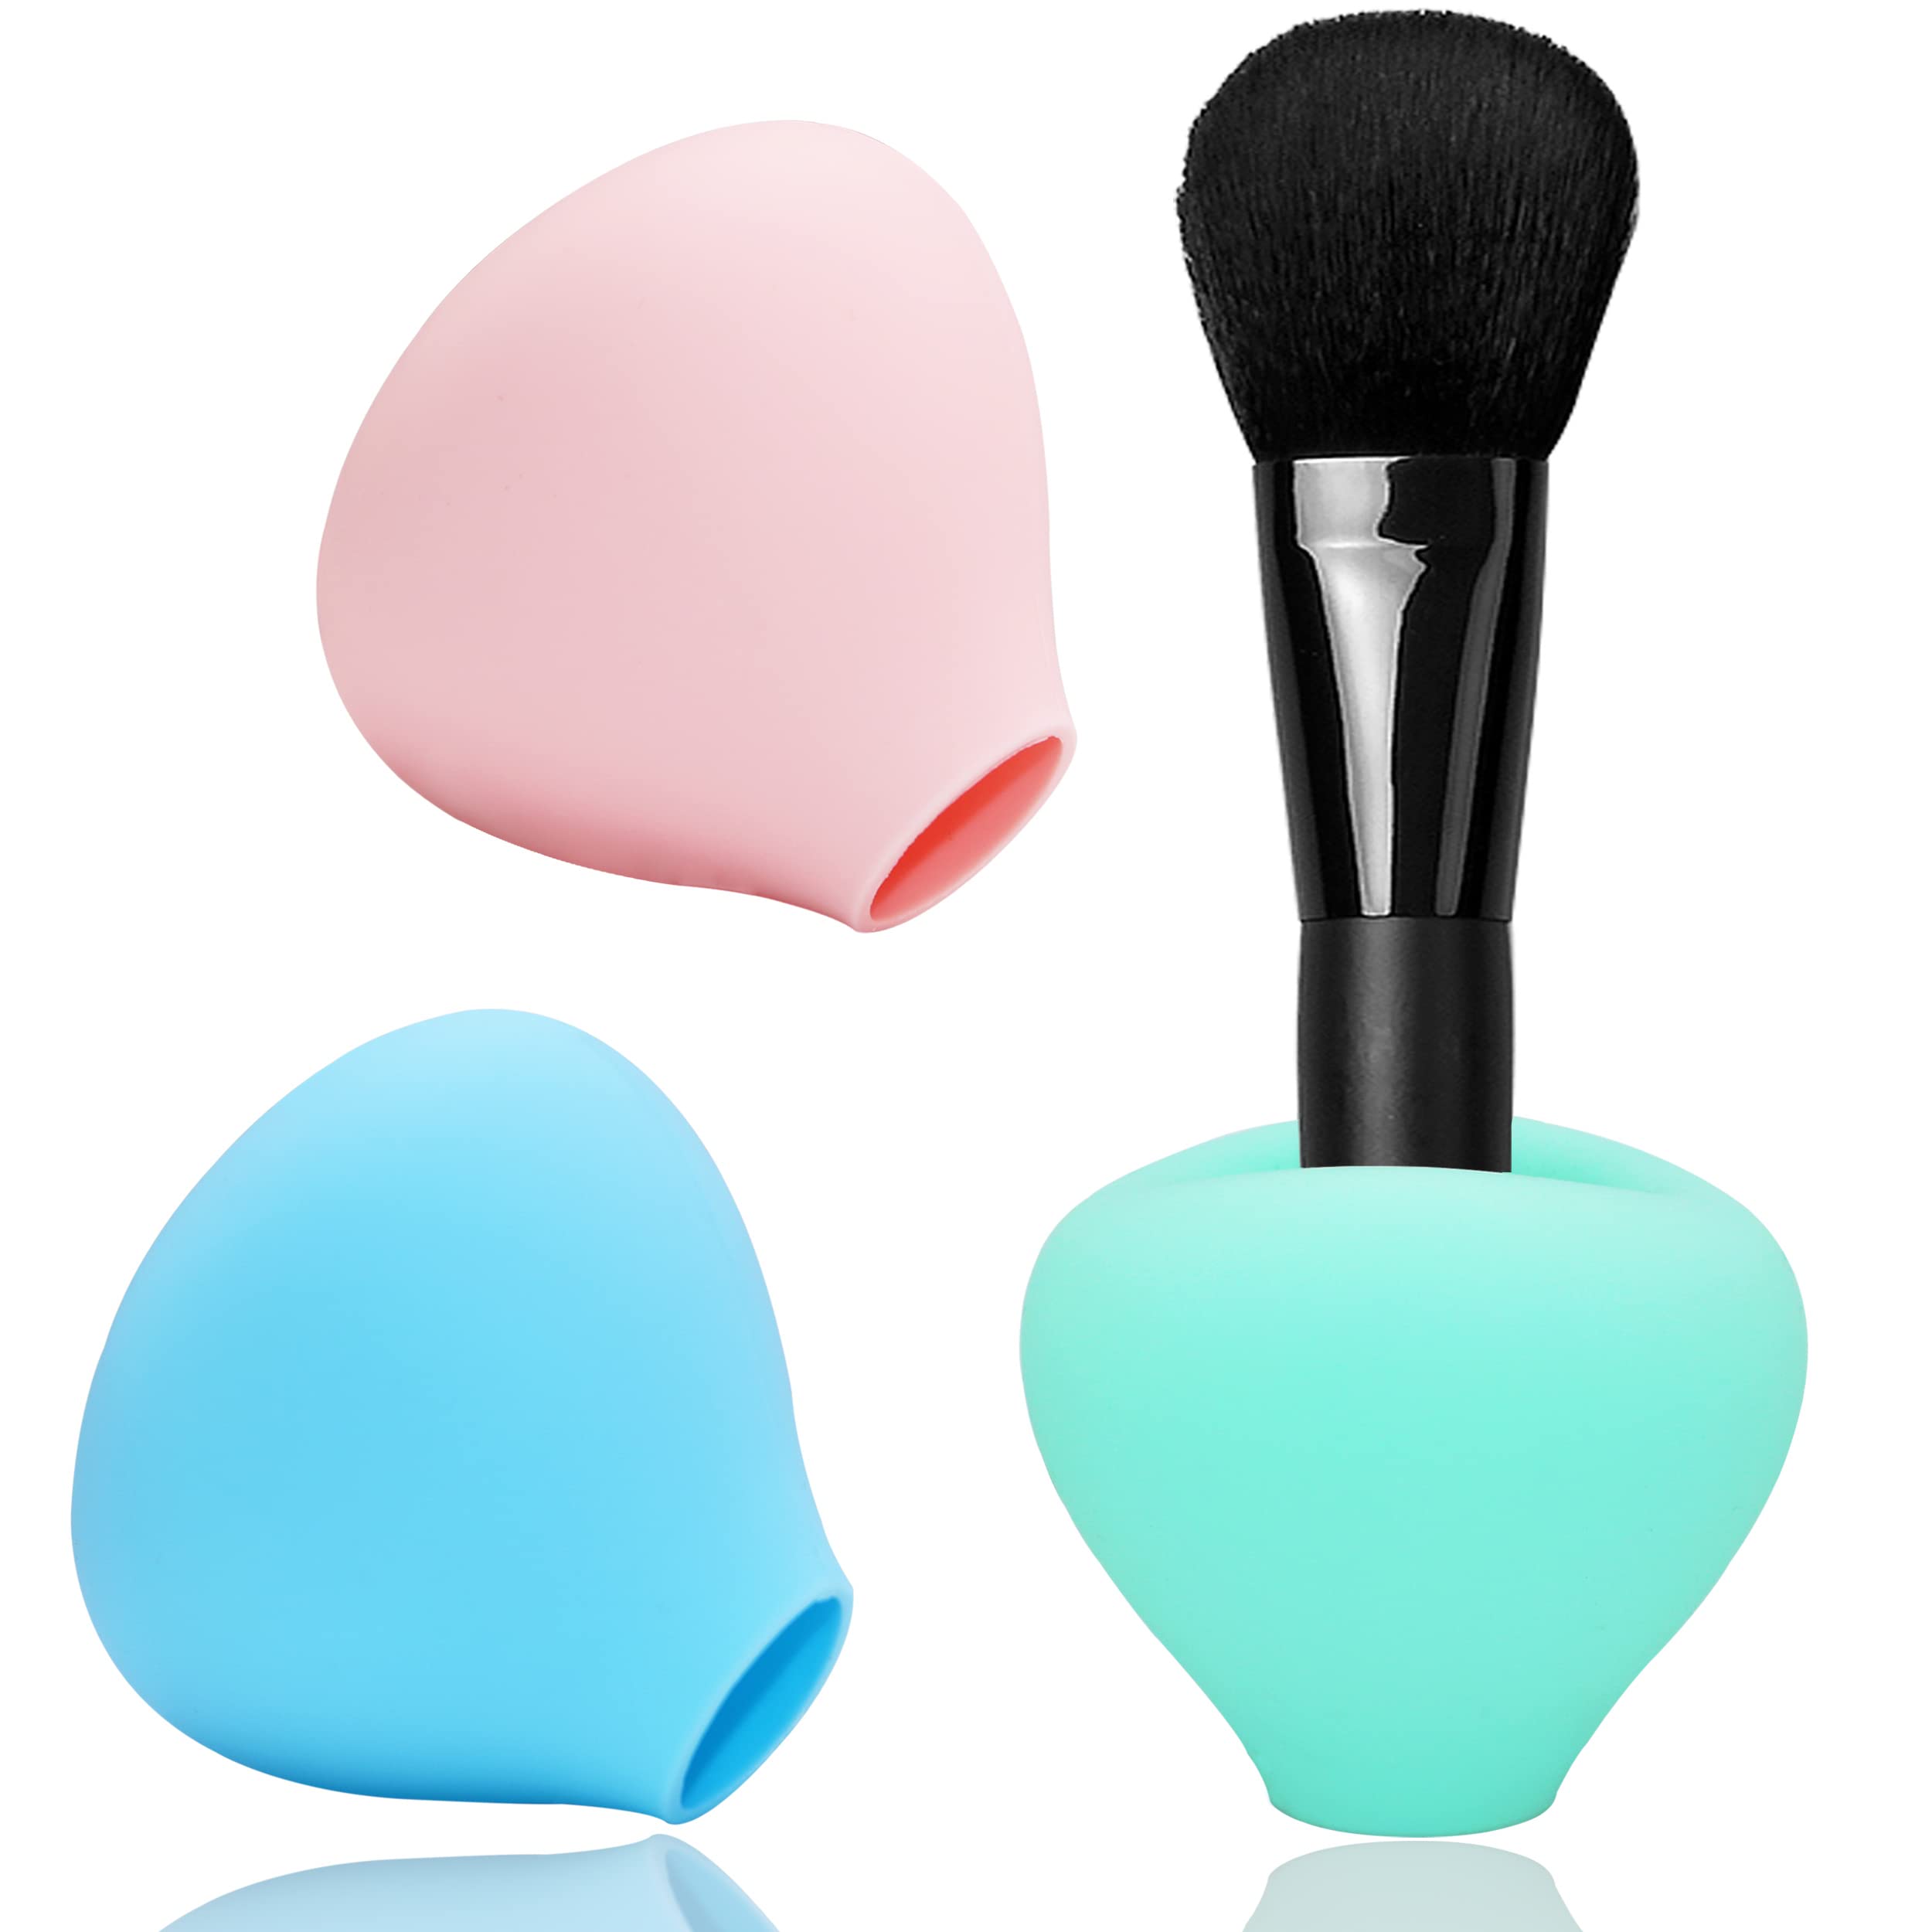  FOMIYES 6pcs Makeup Brush Dust Cover silicone brush holder  silicone make up brush holder silicone makeup brush Makeup Brush Case  makeup holder makeup Brushes Holder Dustproof Cover : Beauty & Personal